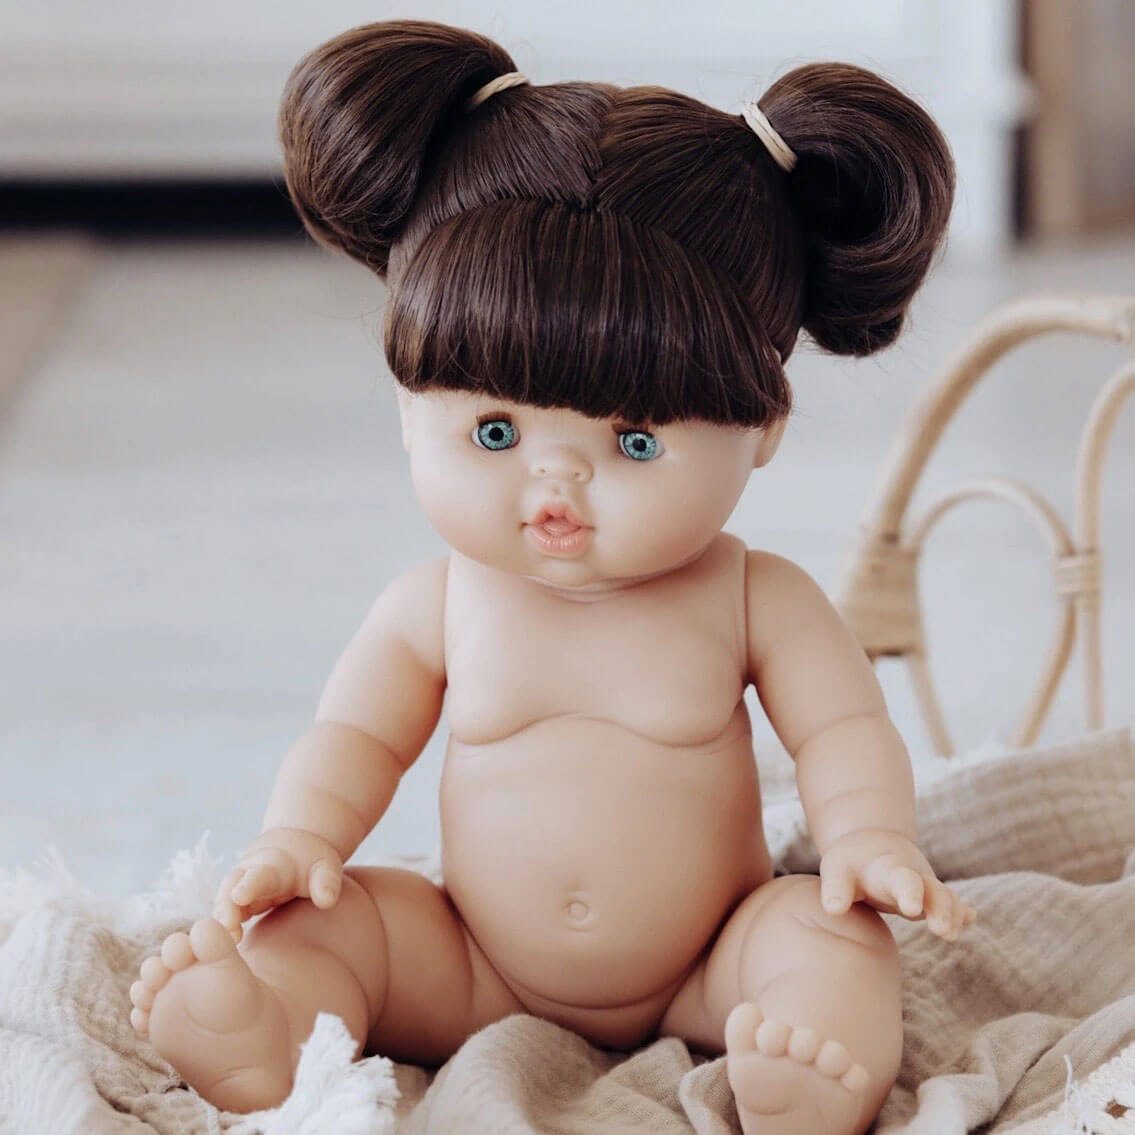 Daisy Gordis Baby Doll - Brunette Girl with Pigtails - Paola Reina